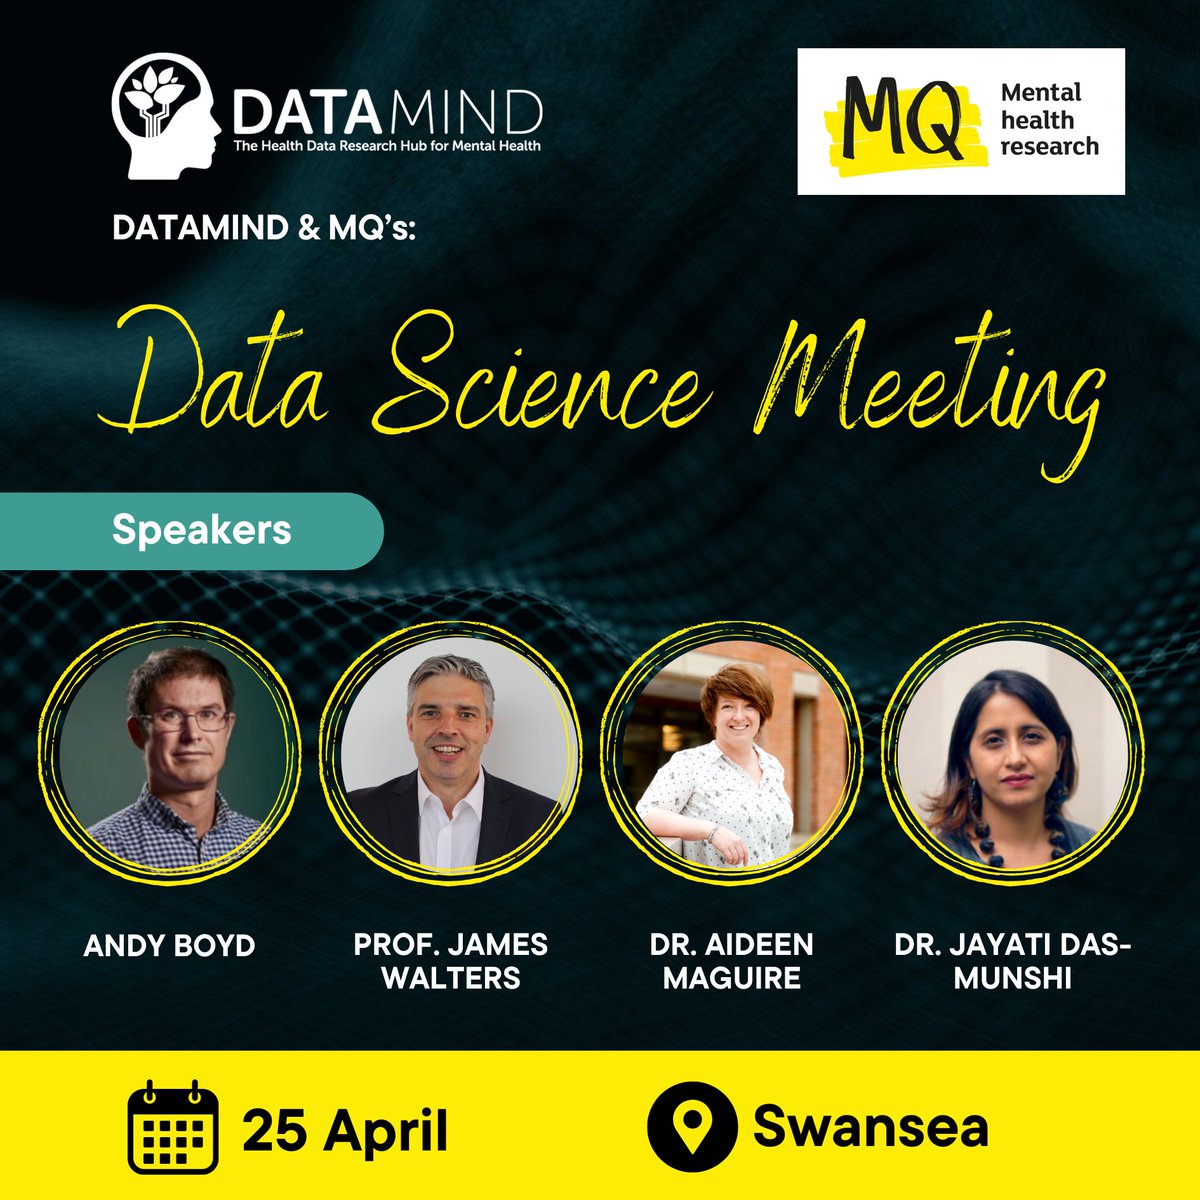 🗣️ Calling all #researchers, practitioners, and professionals passionate about #mentalhealth #datascience! Join us and @MQmentalhealth for an exciting Data Science Meeting with talks by experts like Jayati Das-Munshi, Andy Boyd, and more. Register here: eventbrite.co.uk/e/mq-and-datam…